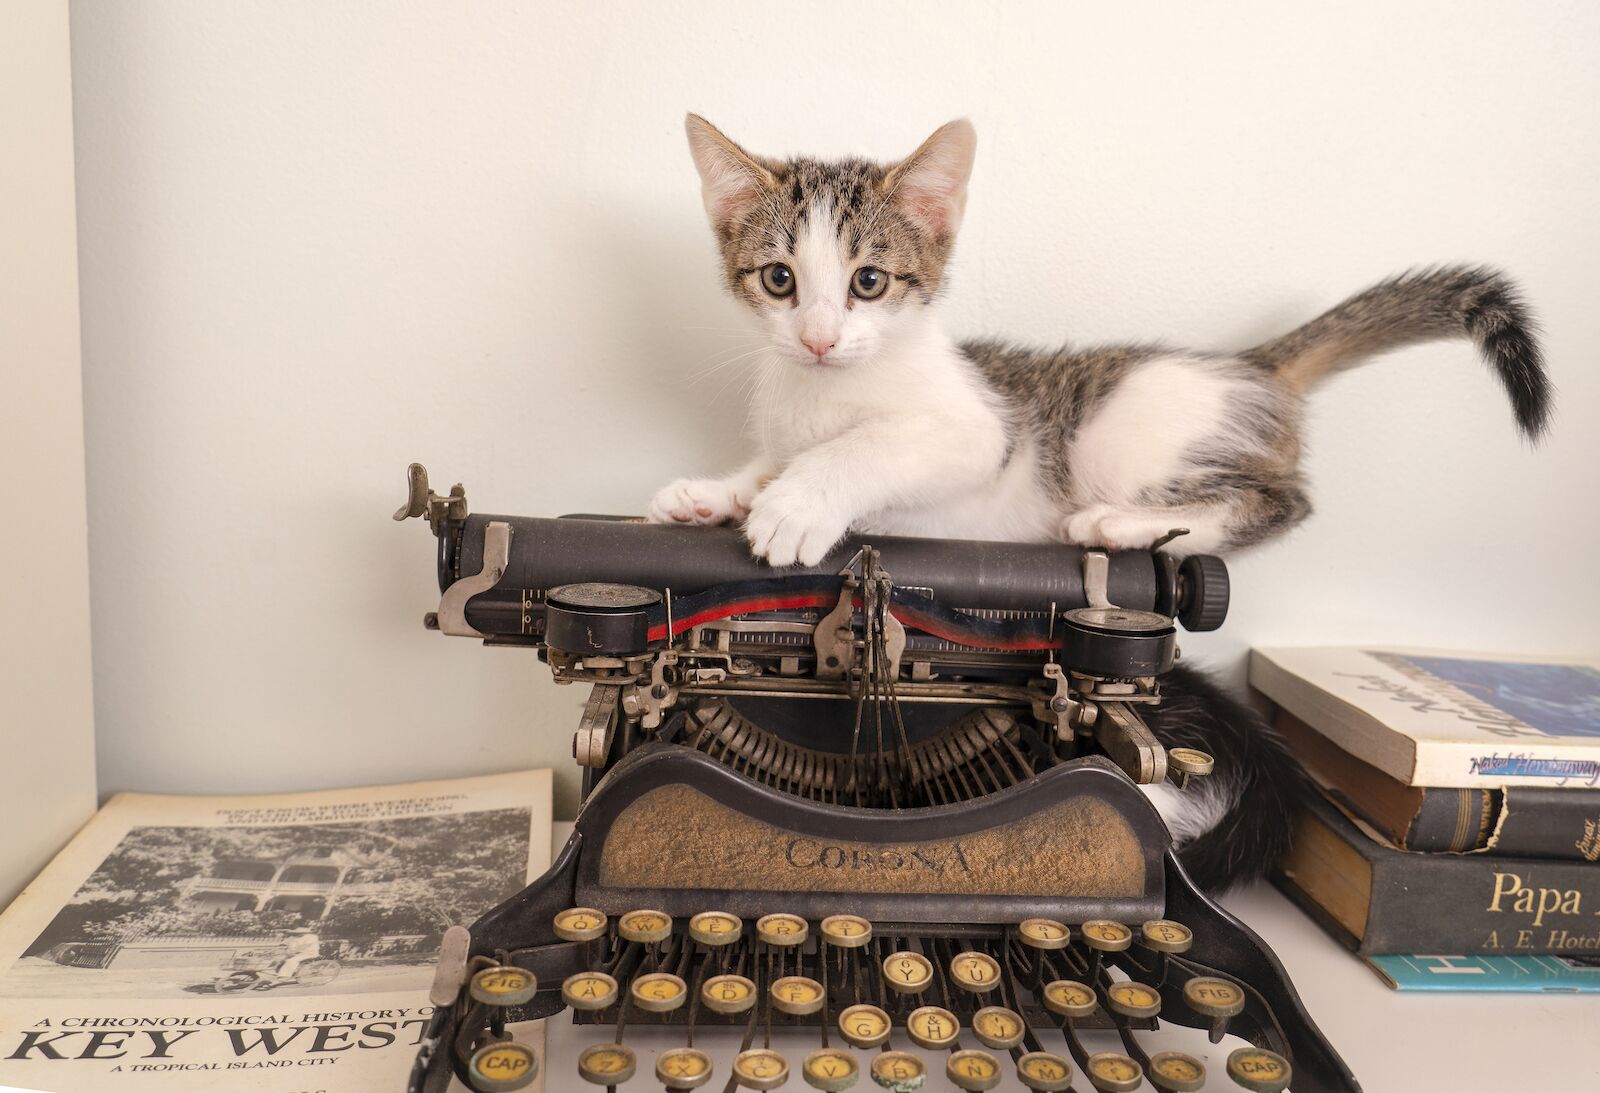 KEY WEST, Florida Keys — A cat dubbed Leonardo da Vinci rests atop an antique typewriter at the Ernest Hemingway Home & Museum on Whitehead Street in Key West, Fla. Hemingway lived and wrote at the home for most of the 1930s, penning some of his best-known works. Now a registered National Historic Landmark, the home is a museum honoring the author — and a haven for several dozen cats, many of them with six toes and descended from a sea captain’s feline given to Hemingway. (Rob O'Neal/Florida Keys News Bureau)